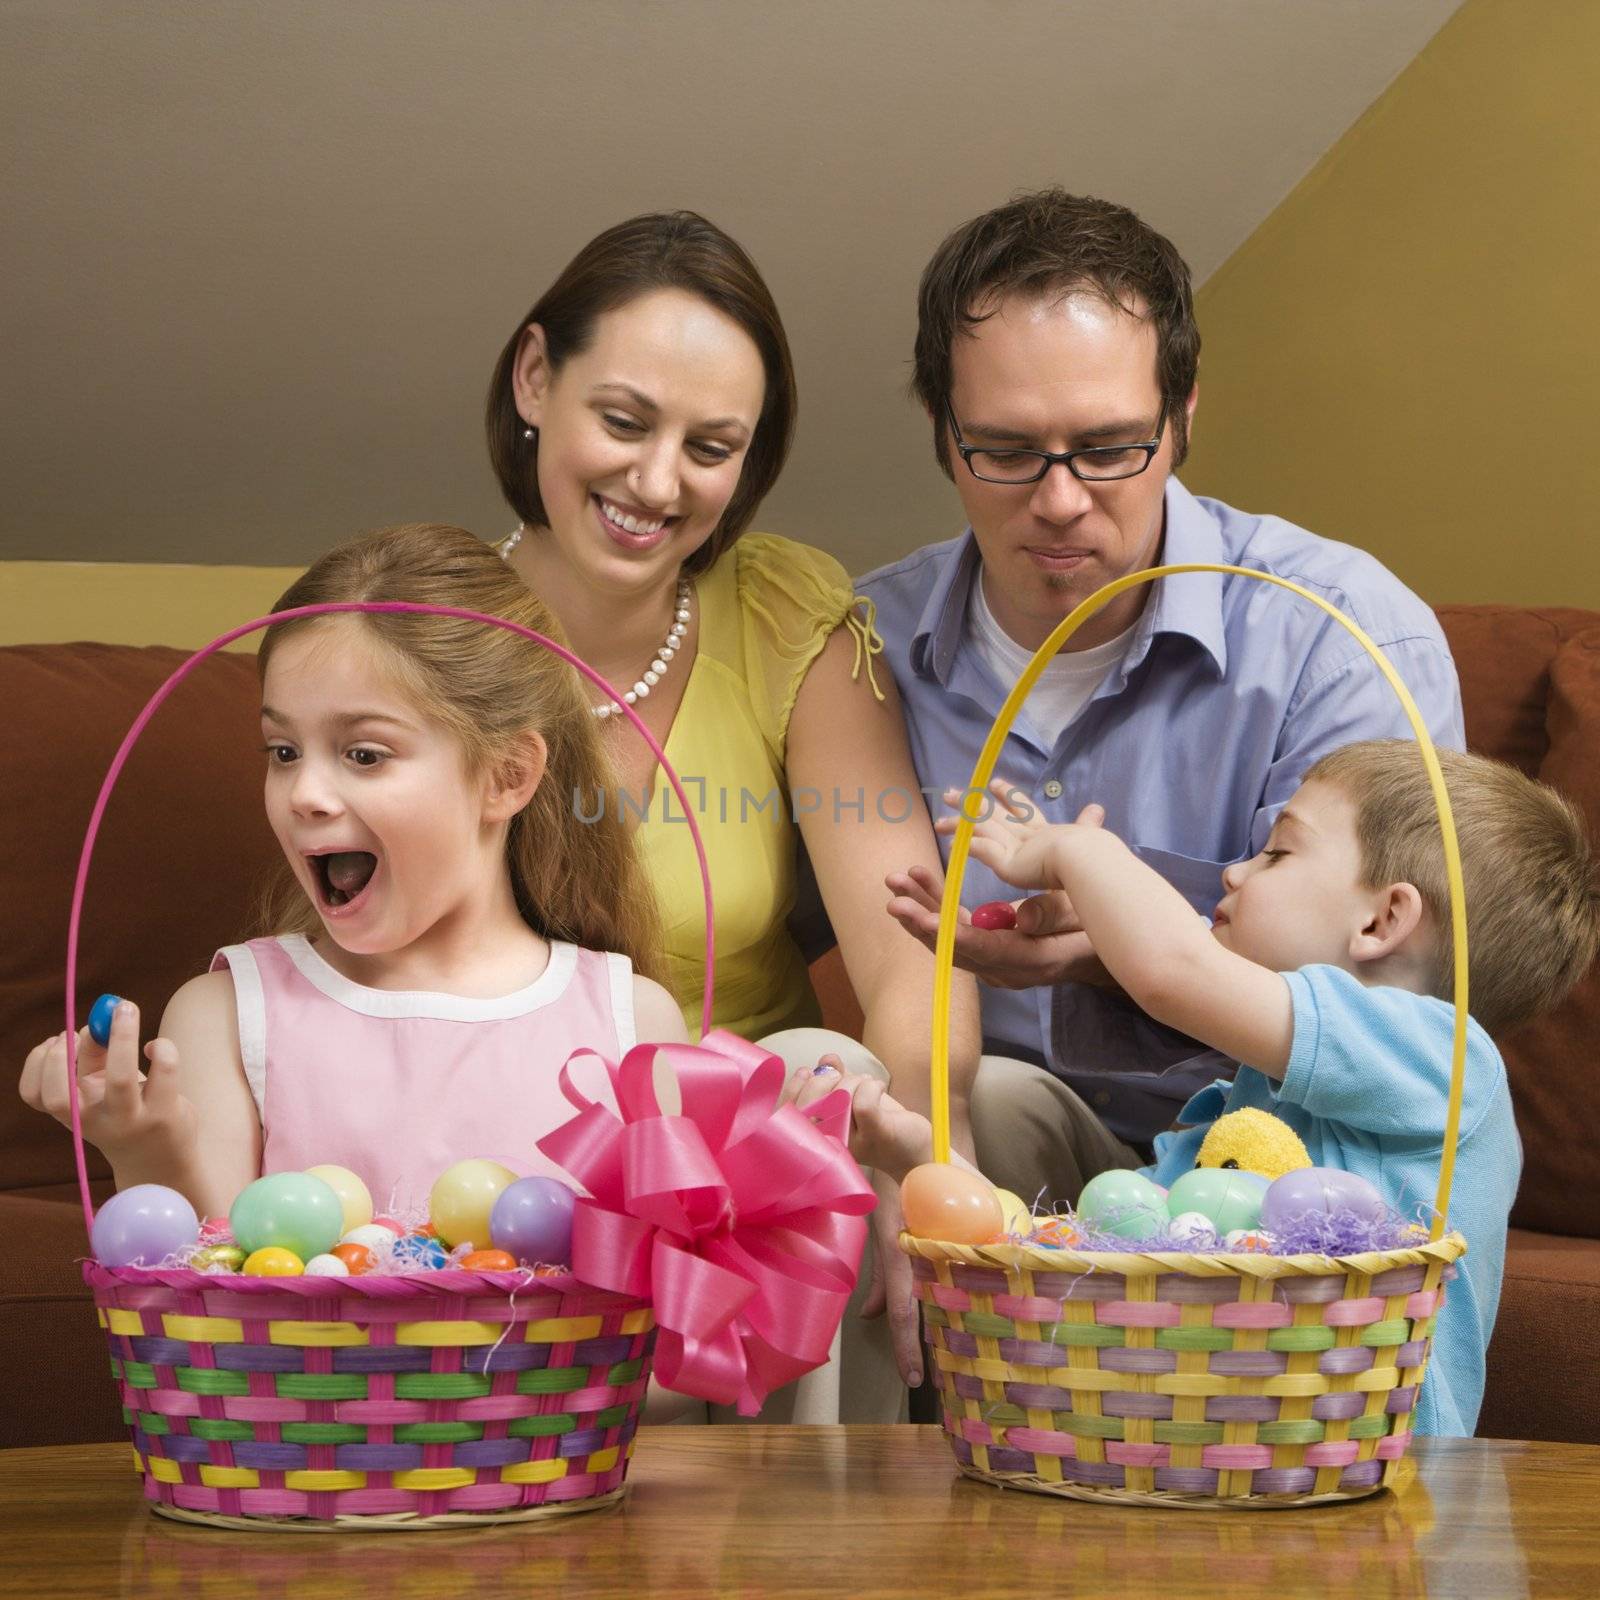 Caucasian family with looking at Easter baskets.